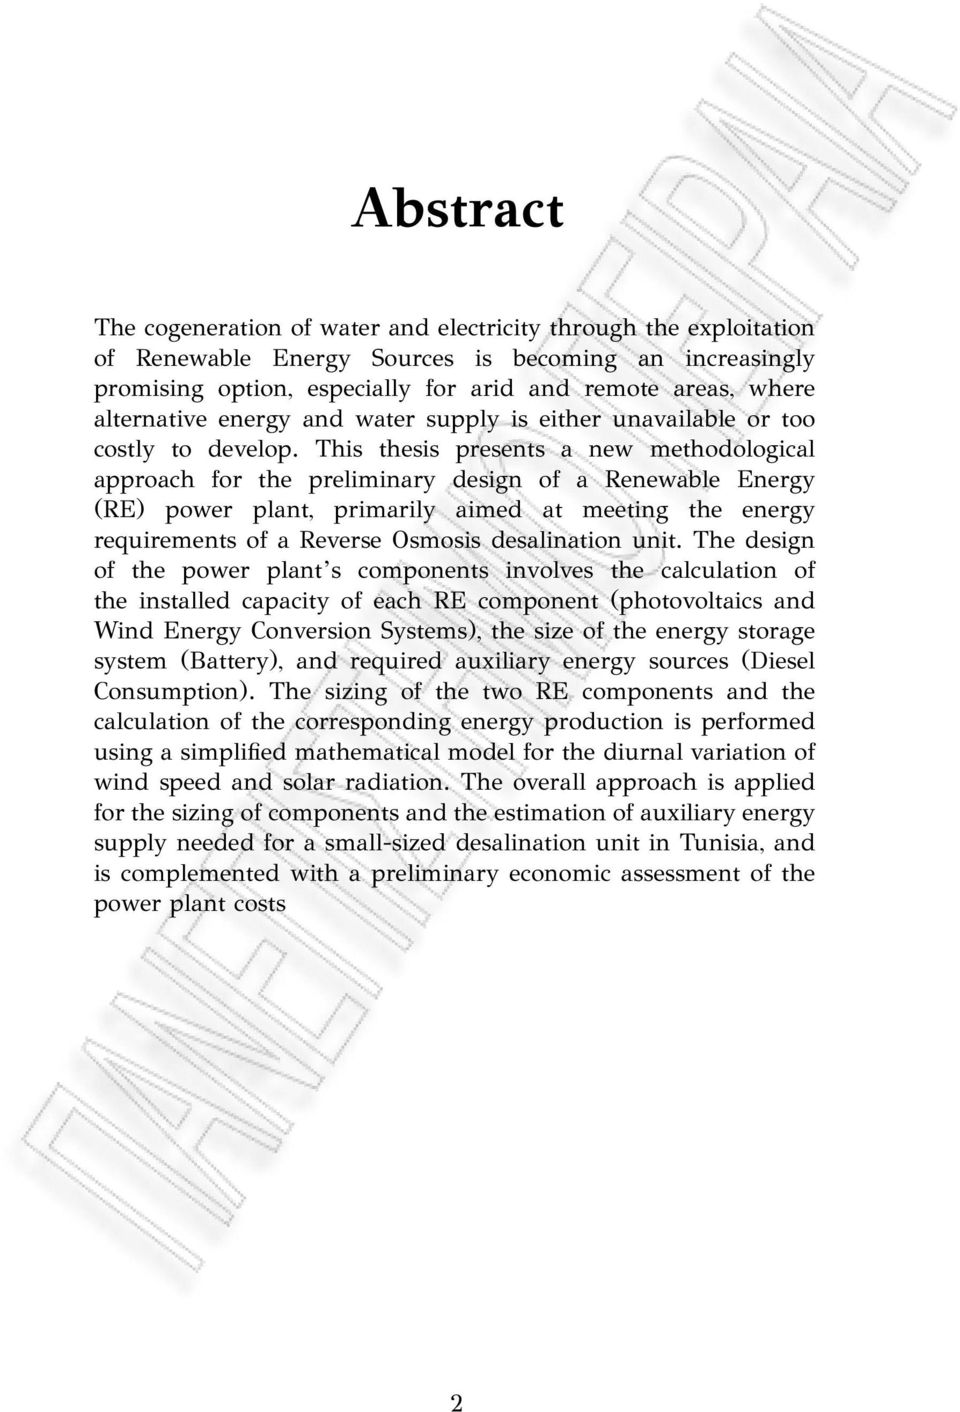 This thesis presents a new methodological approach for the preliminary design of a Renewable Energy (RE) power plant, primarily aimed at meeting the energy requirements of a Reverse Osmosis